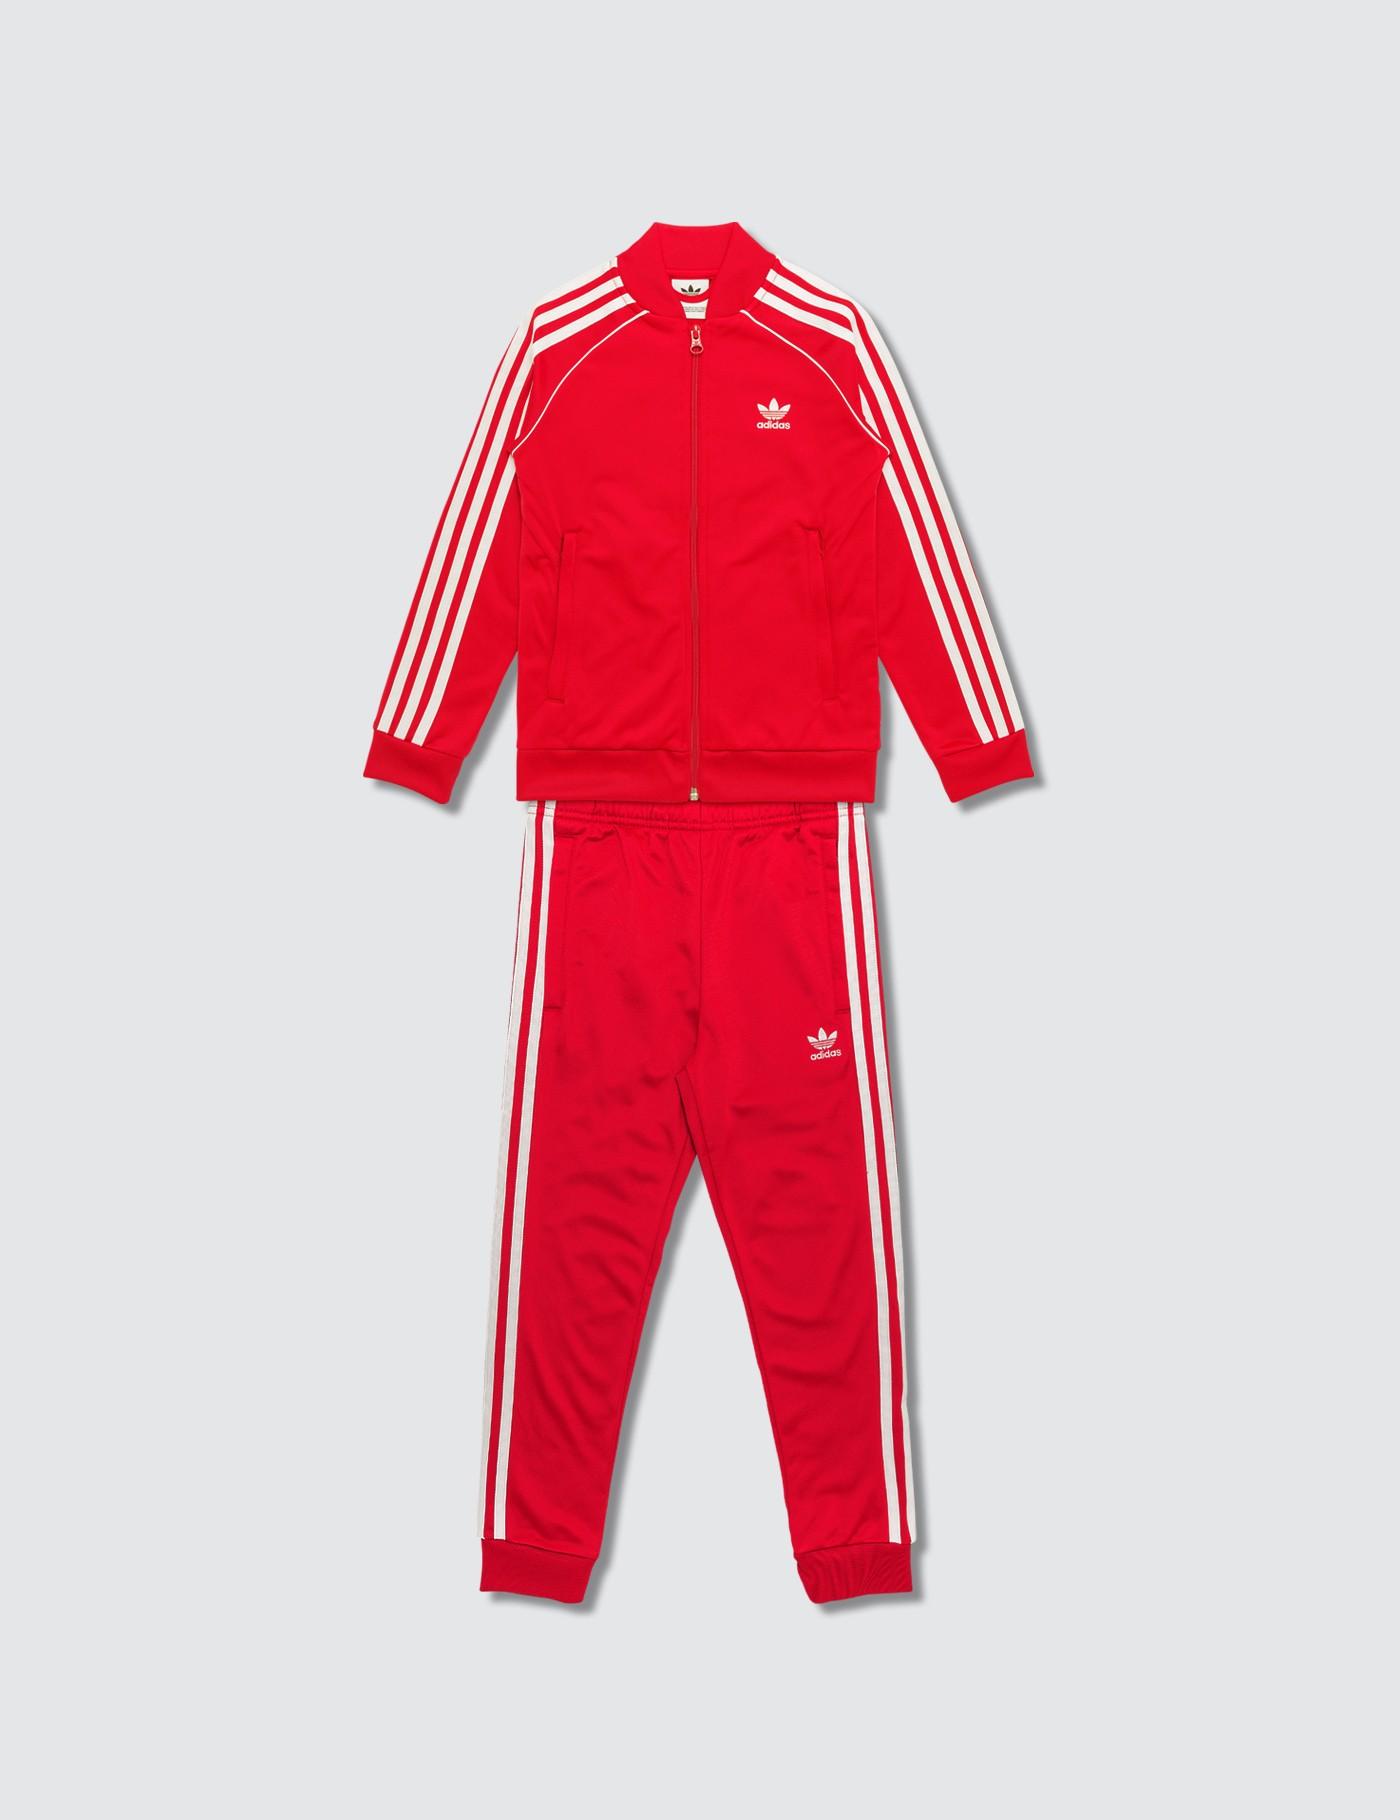 adidas Originals Synthetic Sst Track Suit (kids) in Red for Men - Lyst